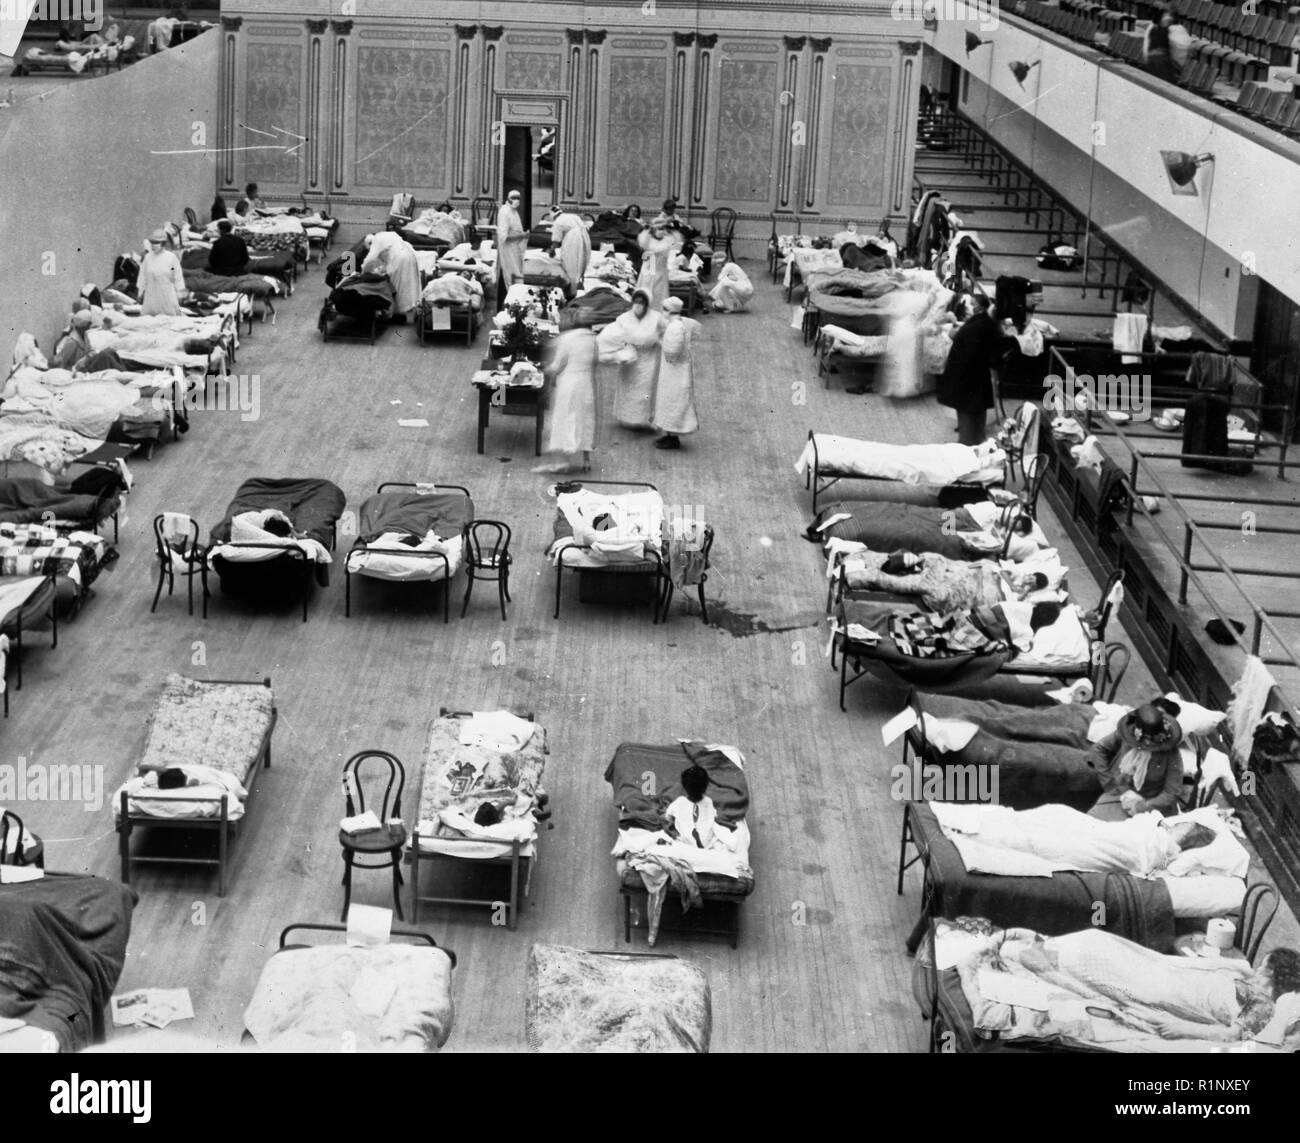 1918 flu epidemic: the Oakland Municipal Auditorium in use as a temporary hospital. The photograph depicts volunteer nurses from the American Red Cross tending influenza sufferers in the Oakland Auditorium, Oakland, California, during the influenza pandemic of 1918. Stock Photo